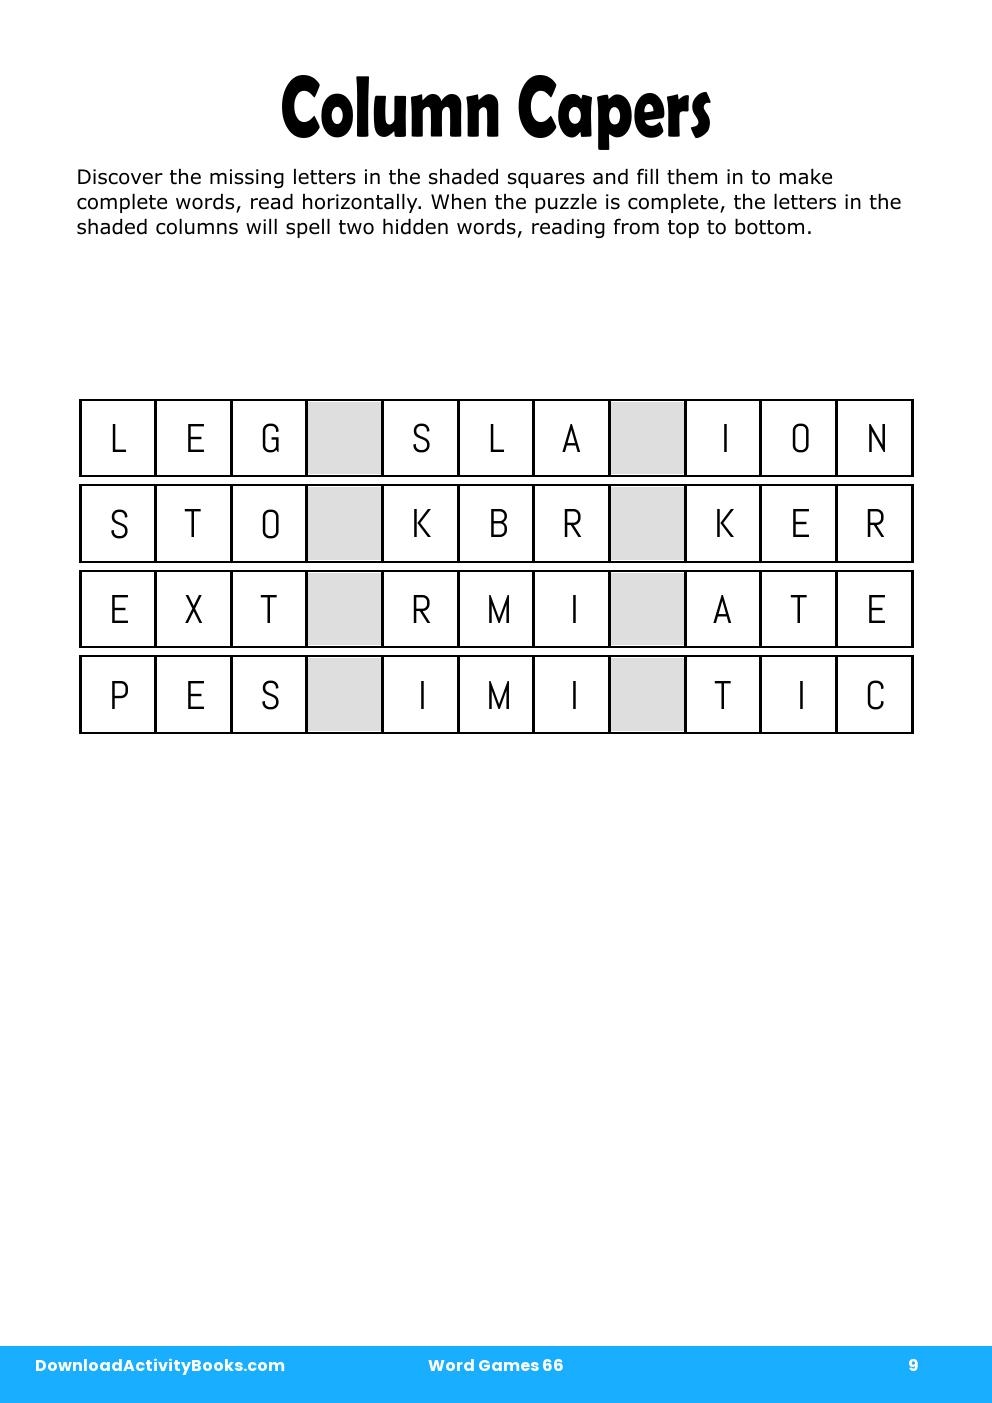 Column Capers in Word Games 66